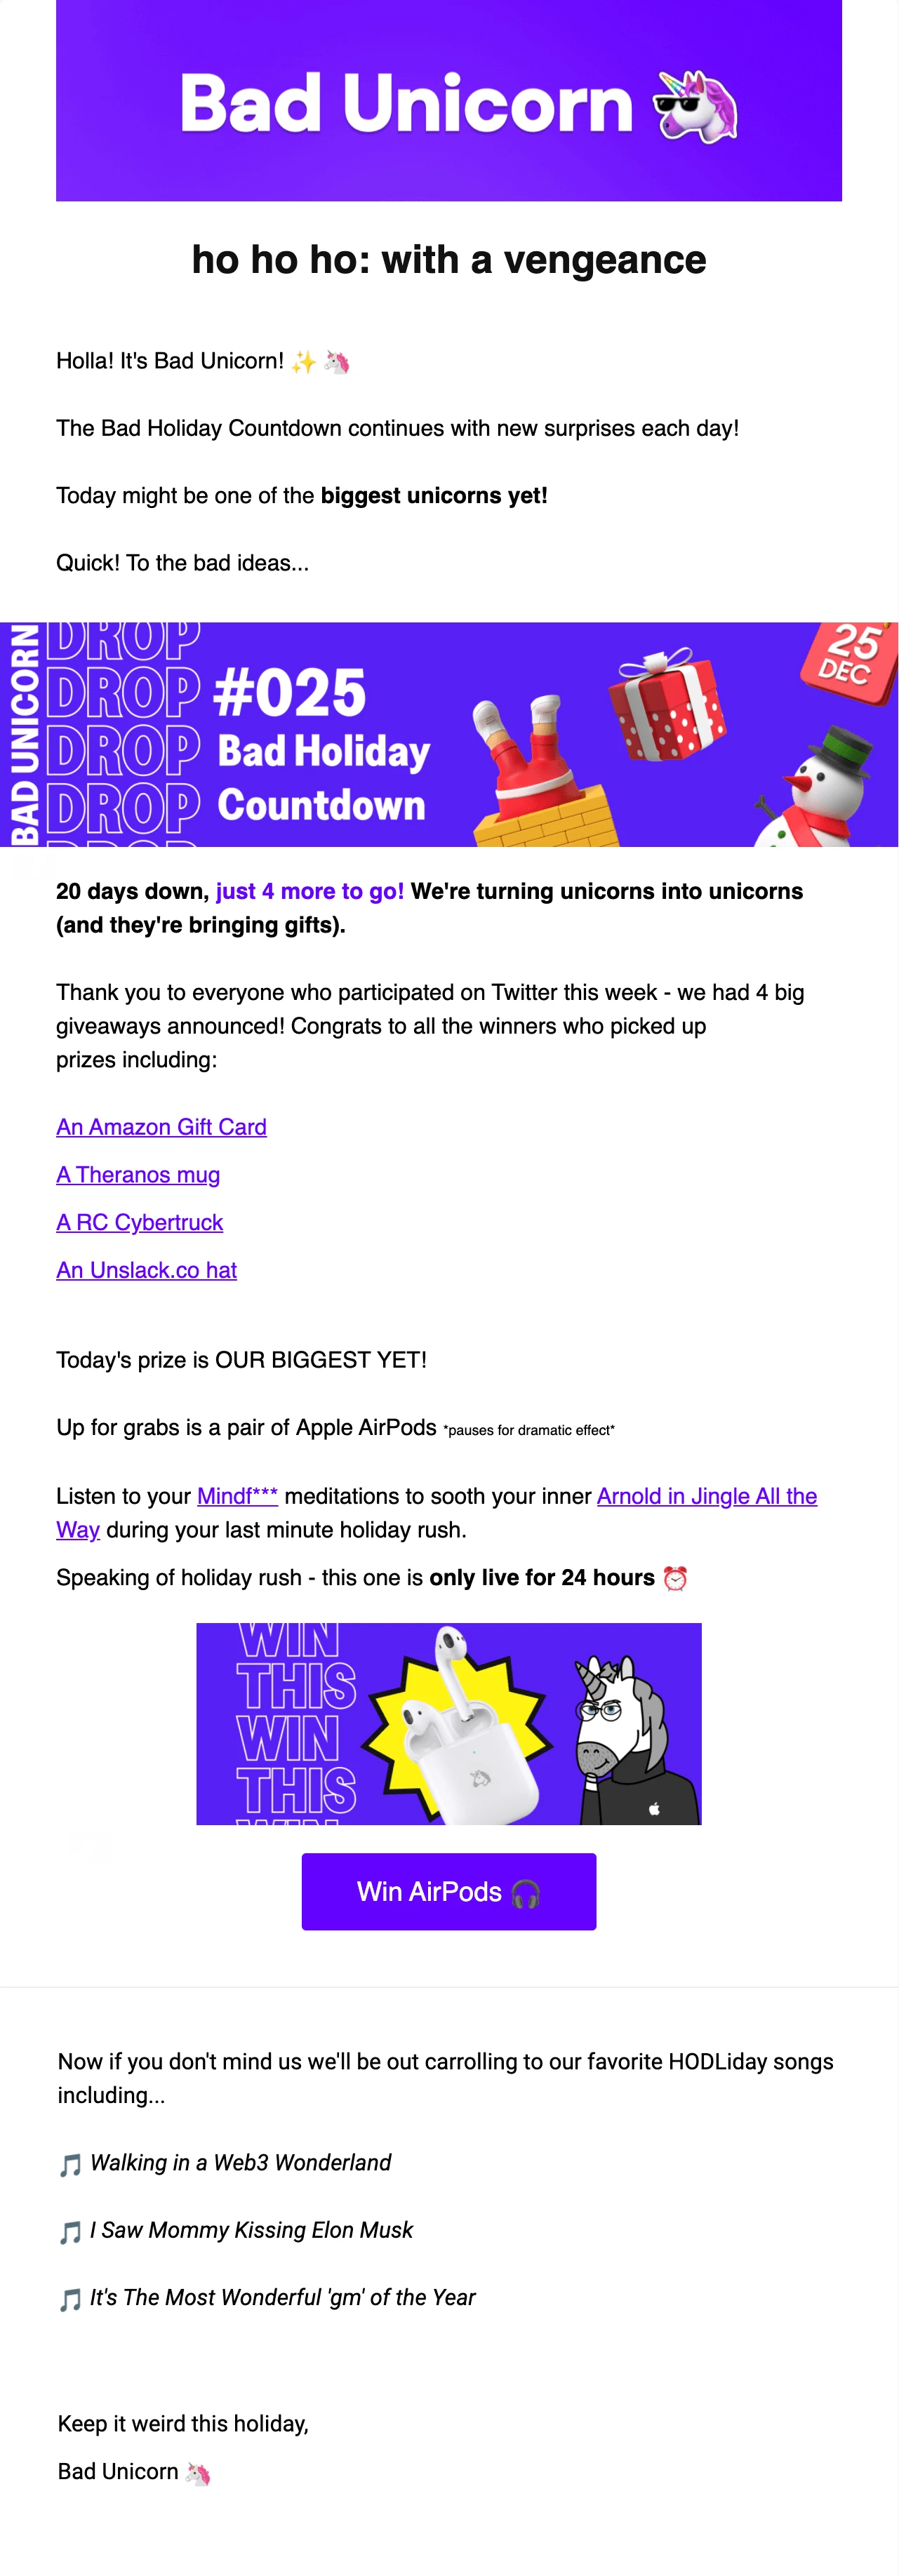 Bad Unicorn email campaign with cross-channel promotion with Twitter